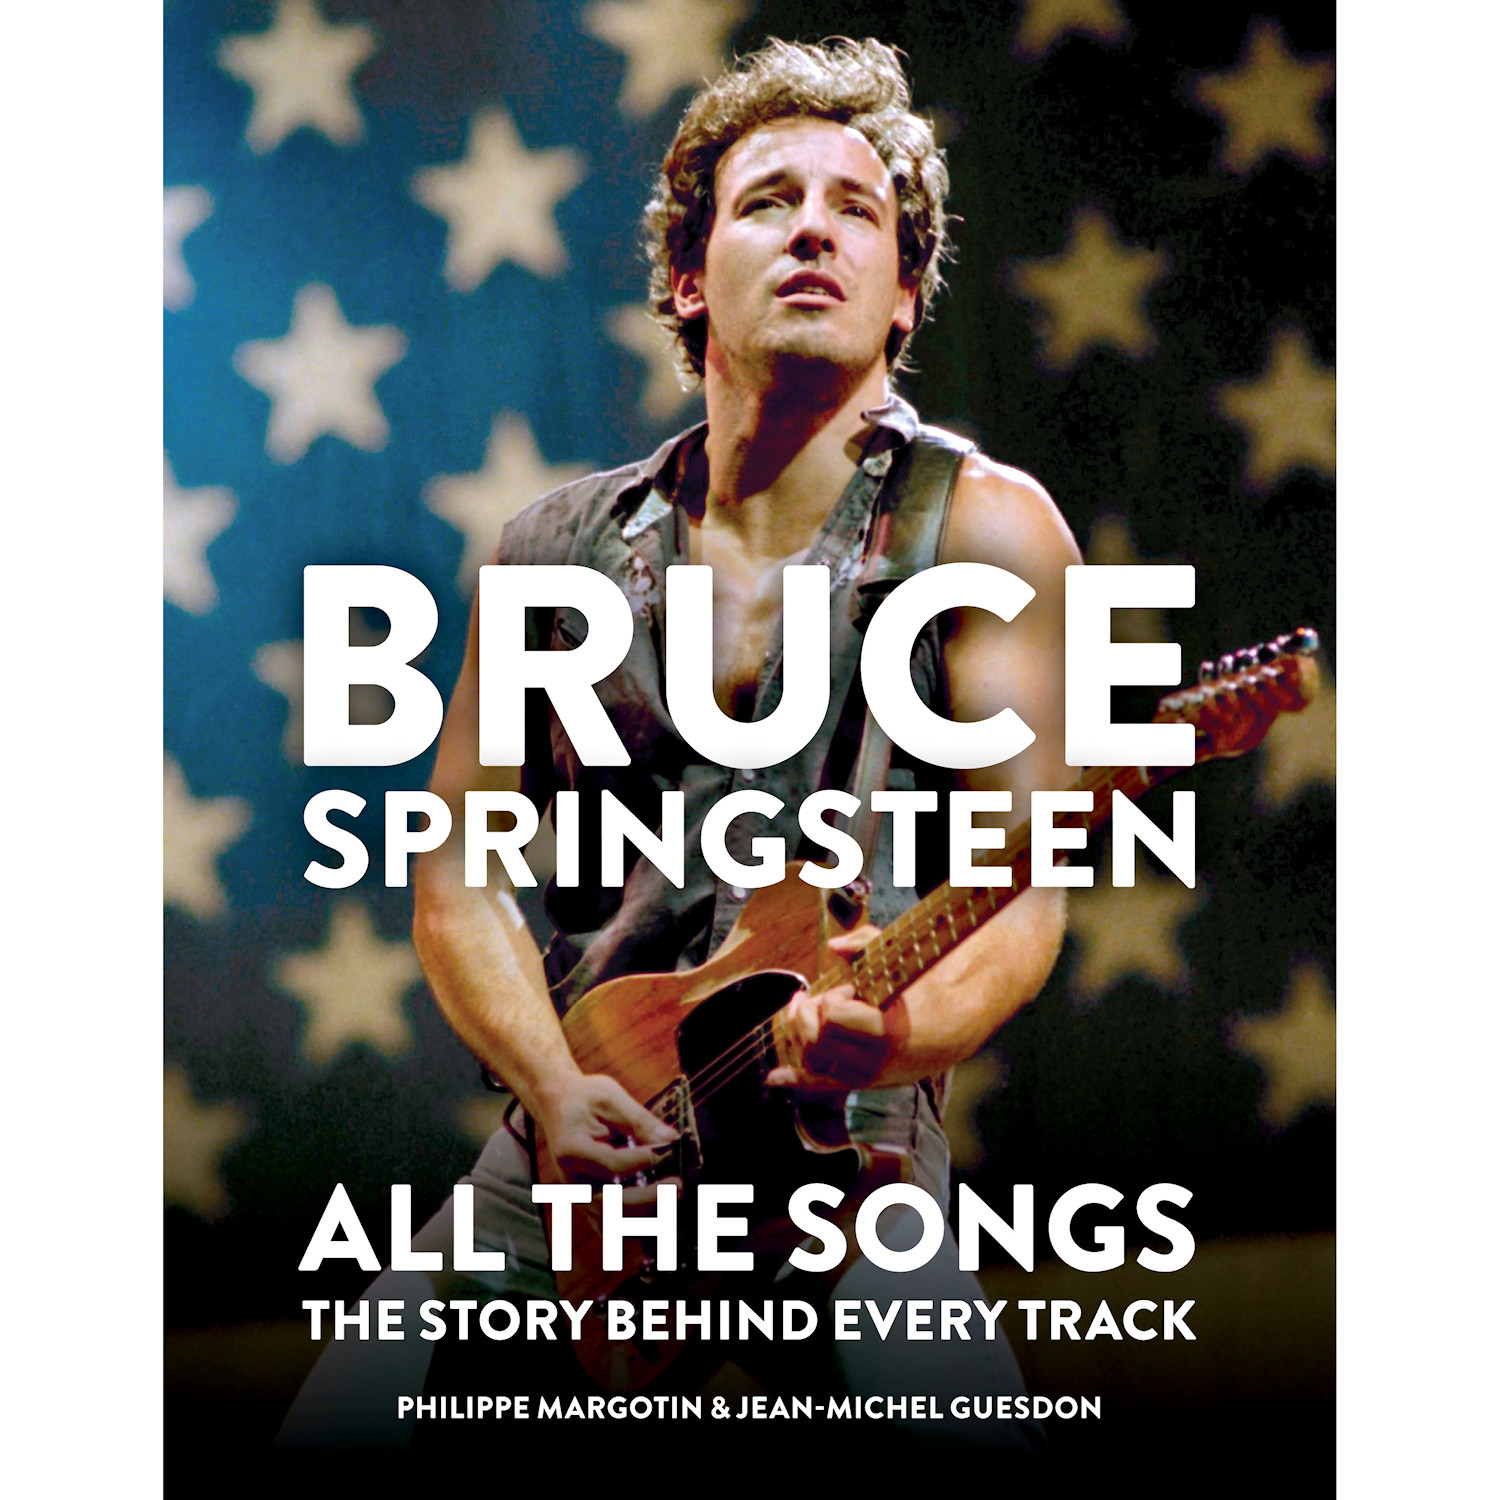 LONELY PLANET/HACHETTE Bruce Springsteen: All the Songs Hardcover Book